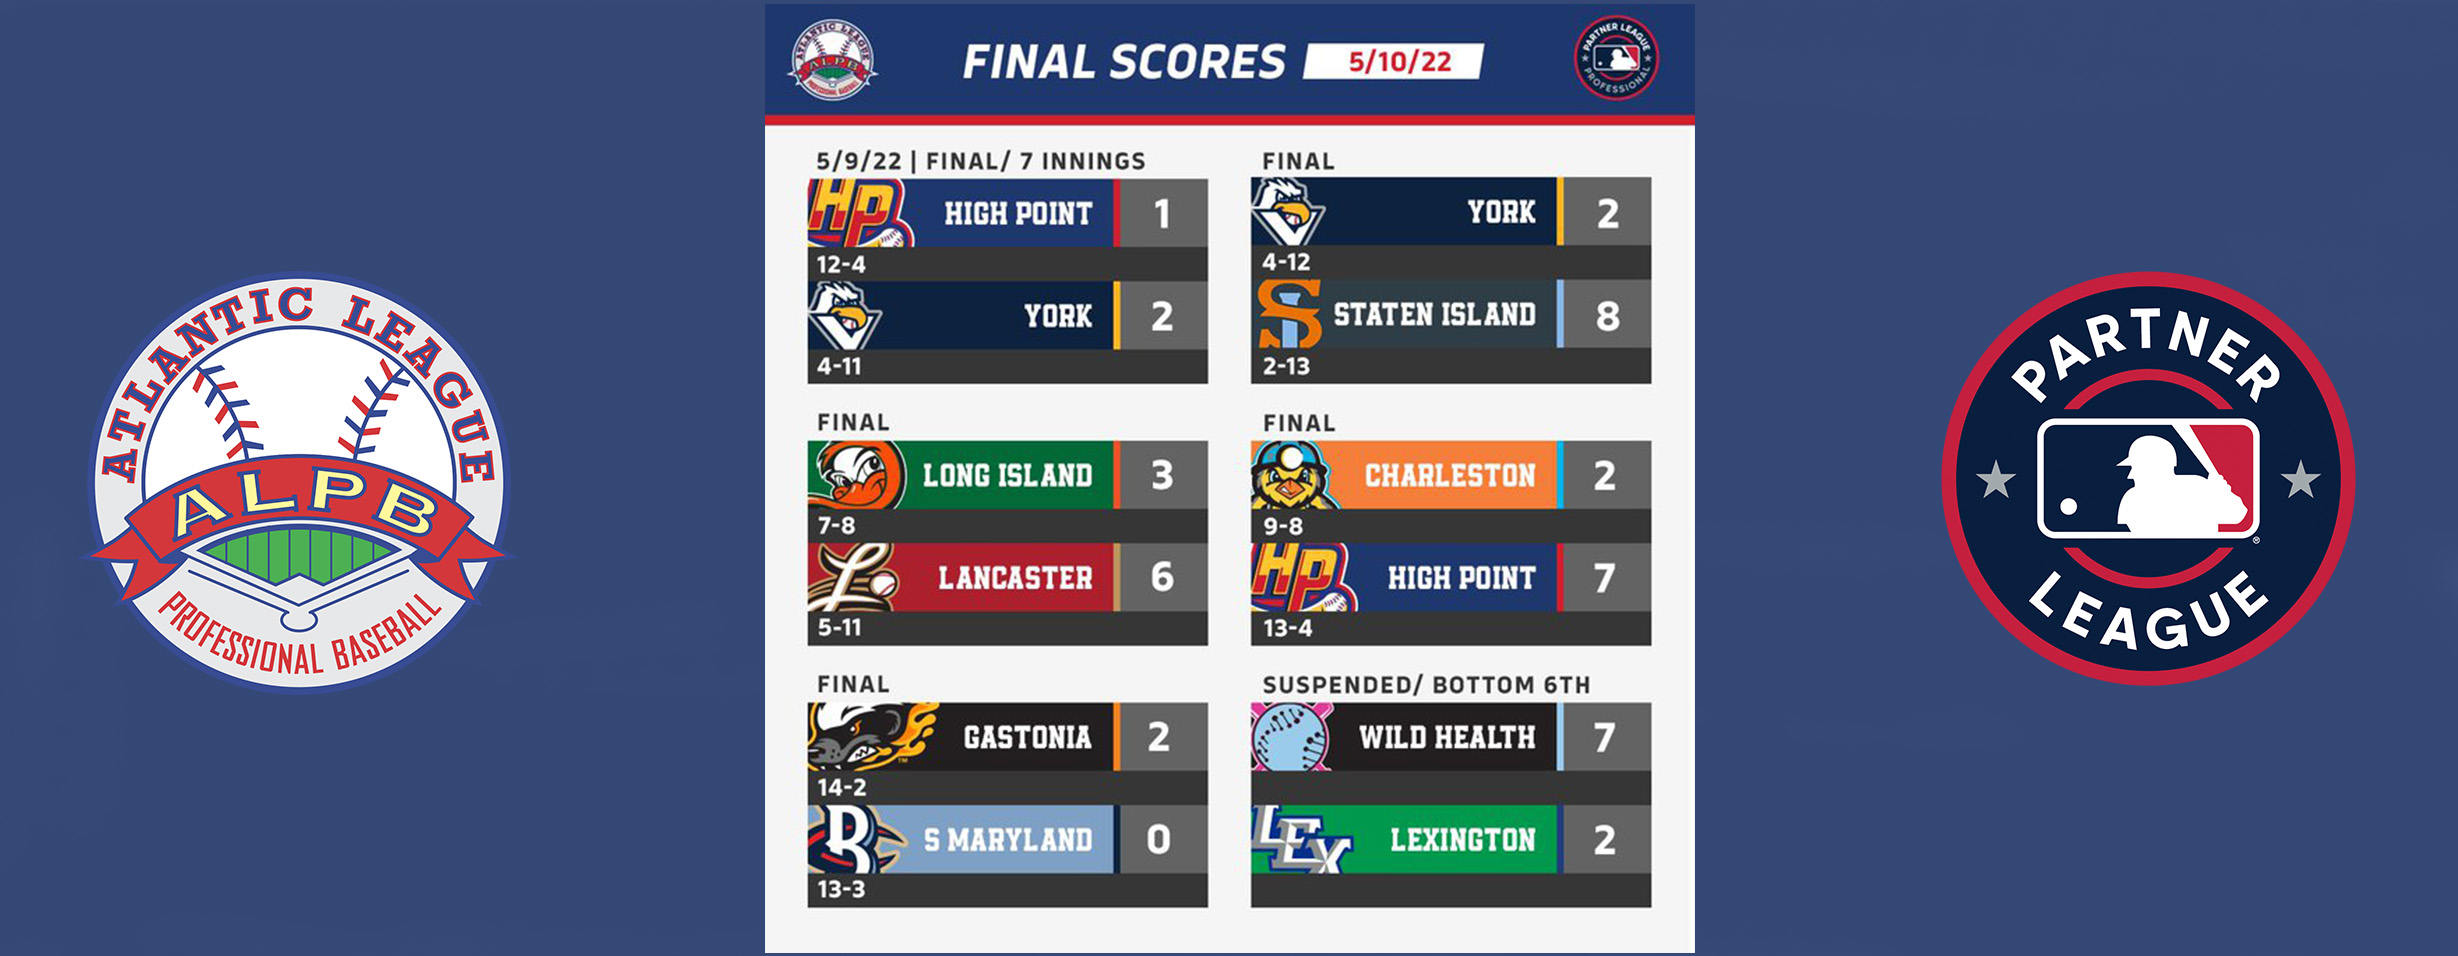 Atlantic League Results, Tuesday, May 10, 2022